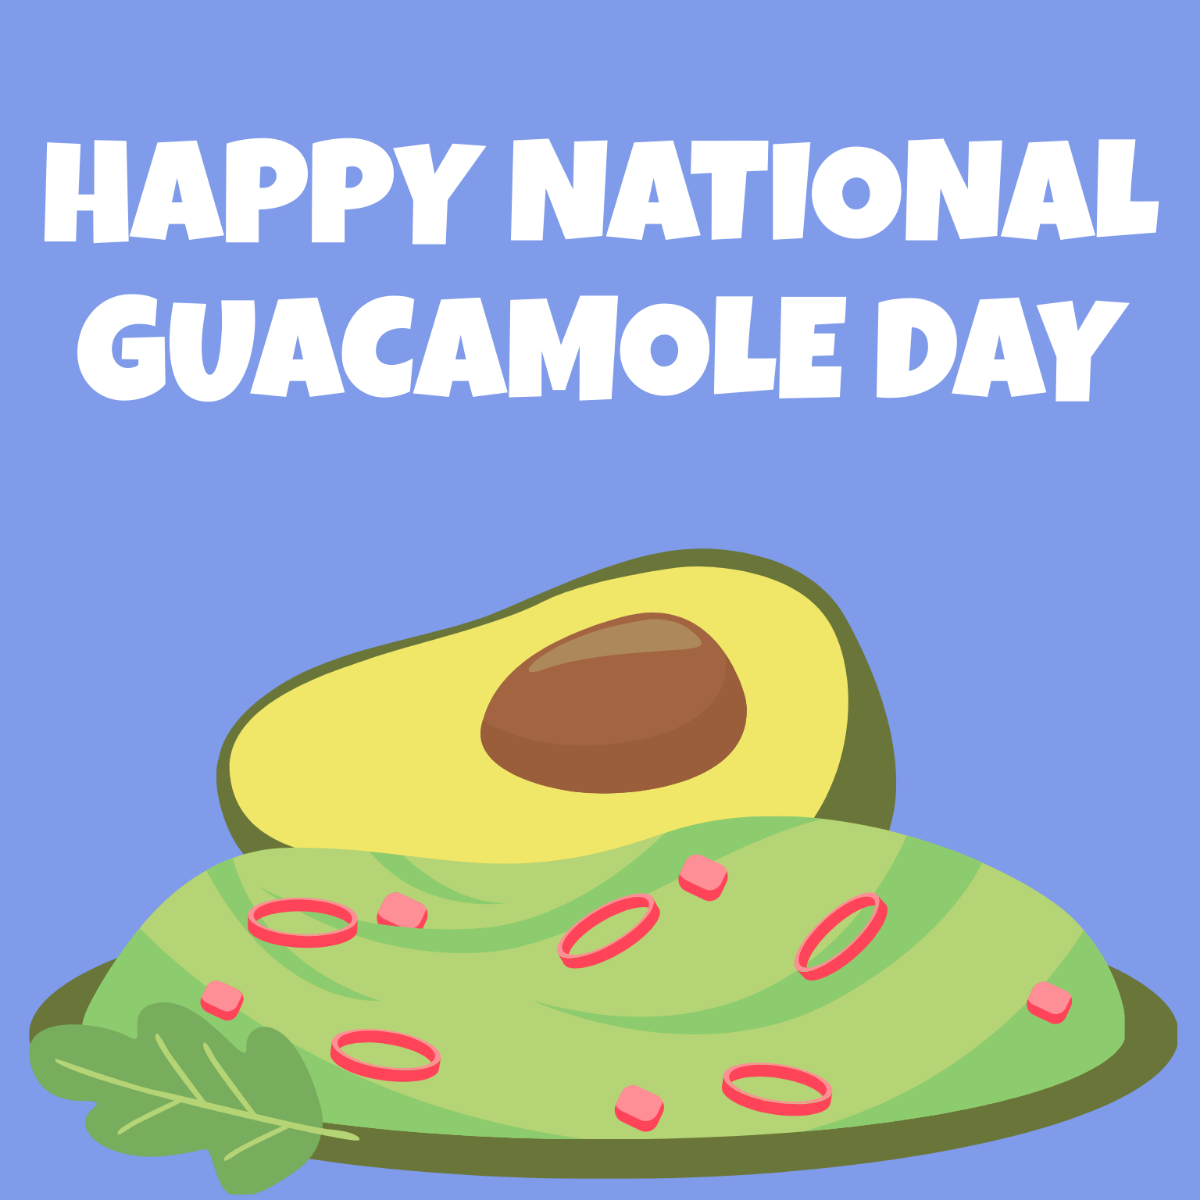 Happy National Guacamole Day Illustration Template